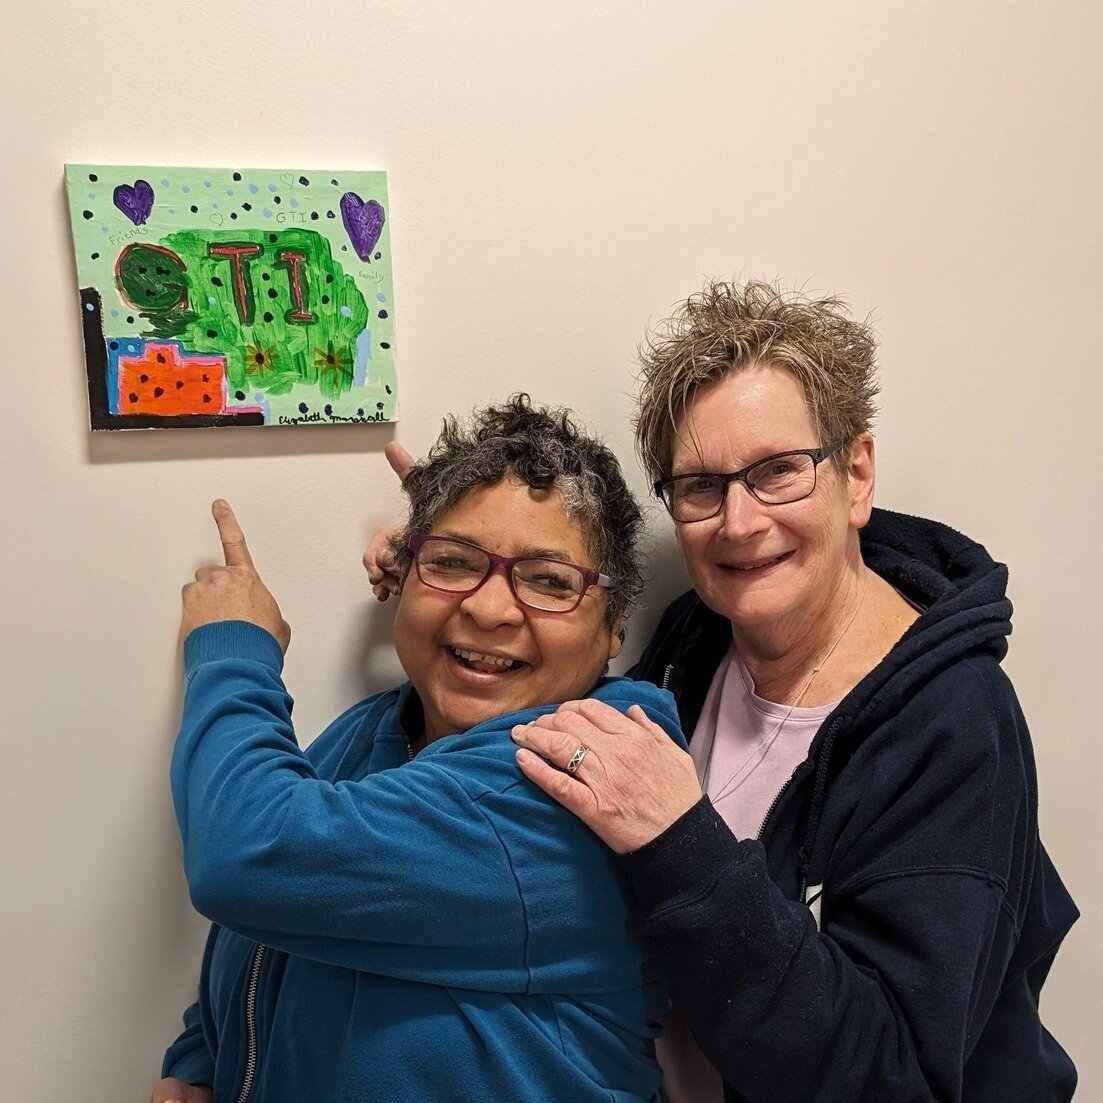 Liz and her Program Manager Madalyn pose with Liz's new painting which was just unveiled as the latest addition to our Team Member Art Wall!